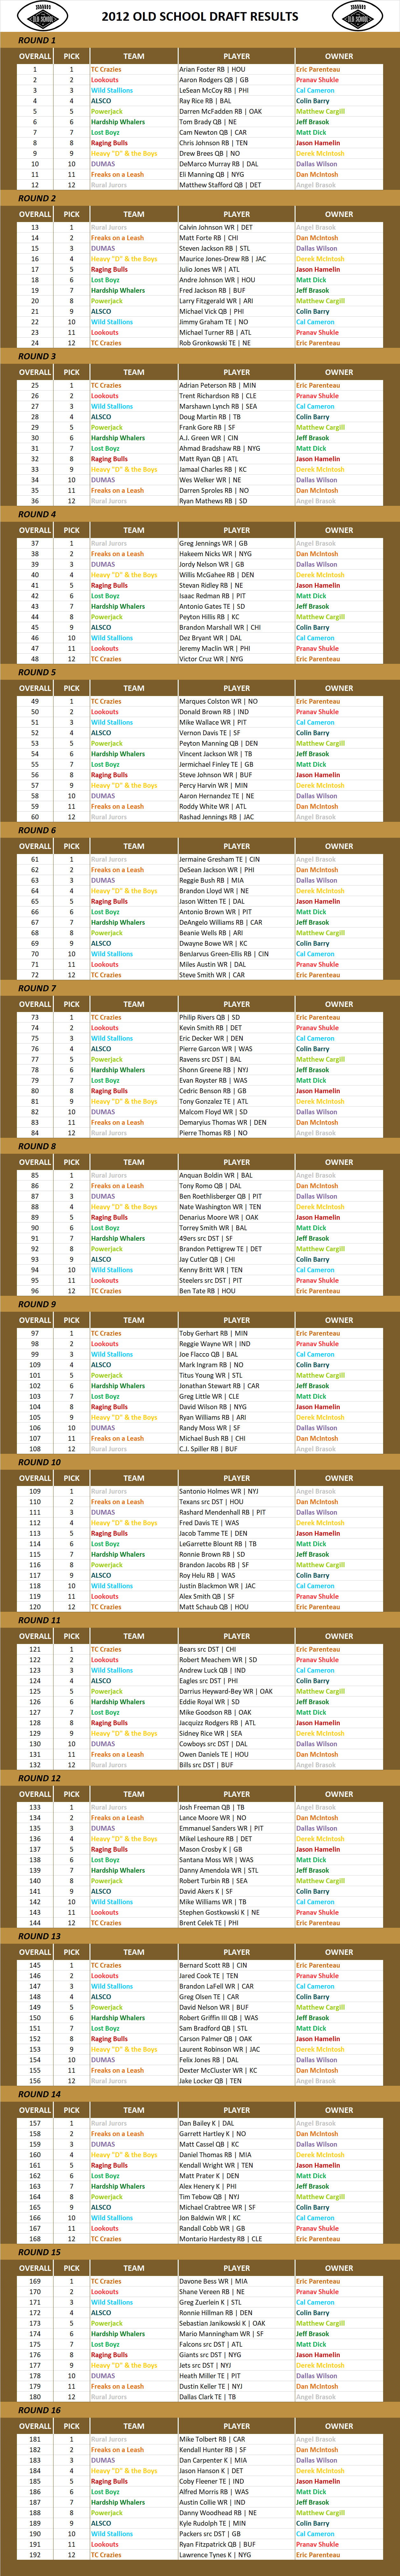 2012 National Football League Pool Draft Results